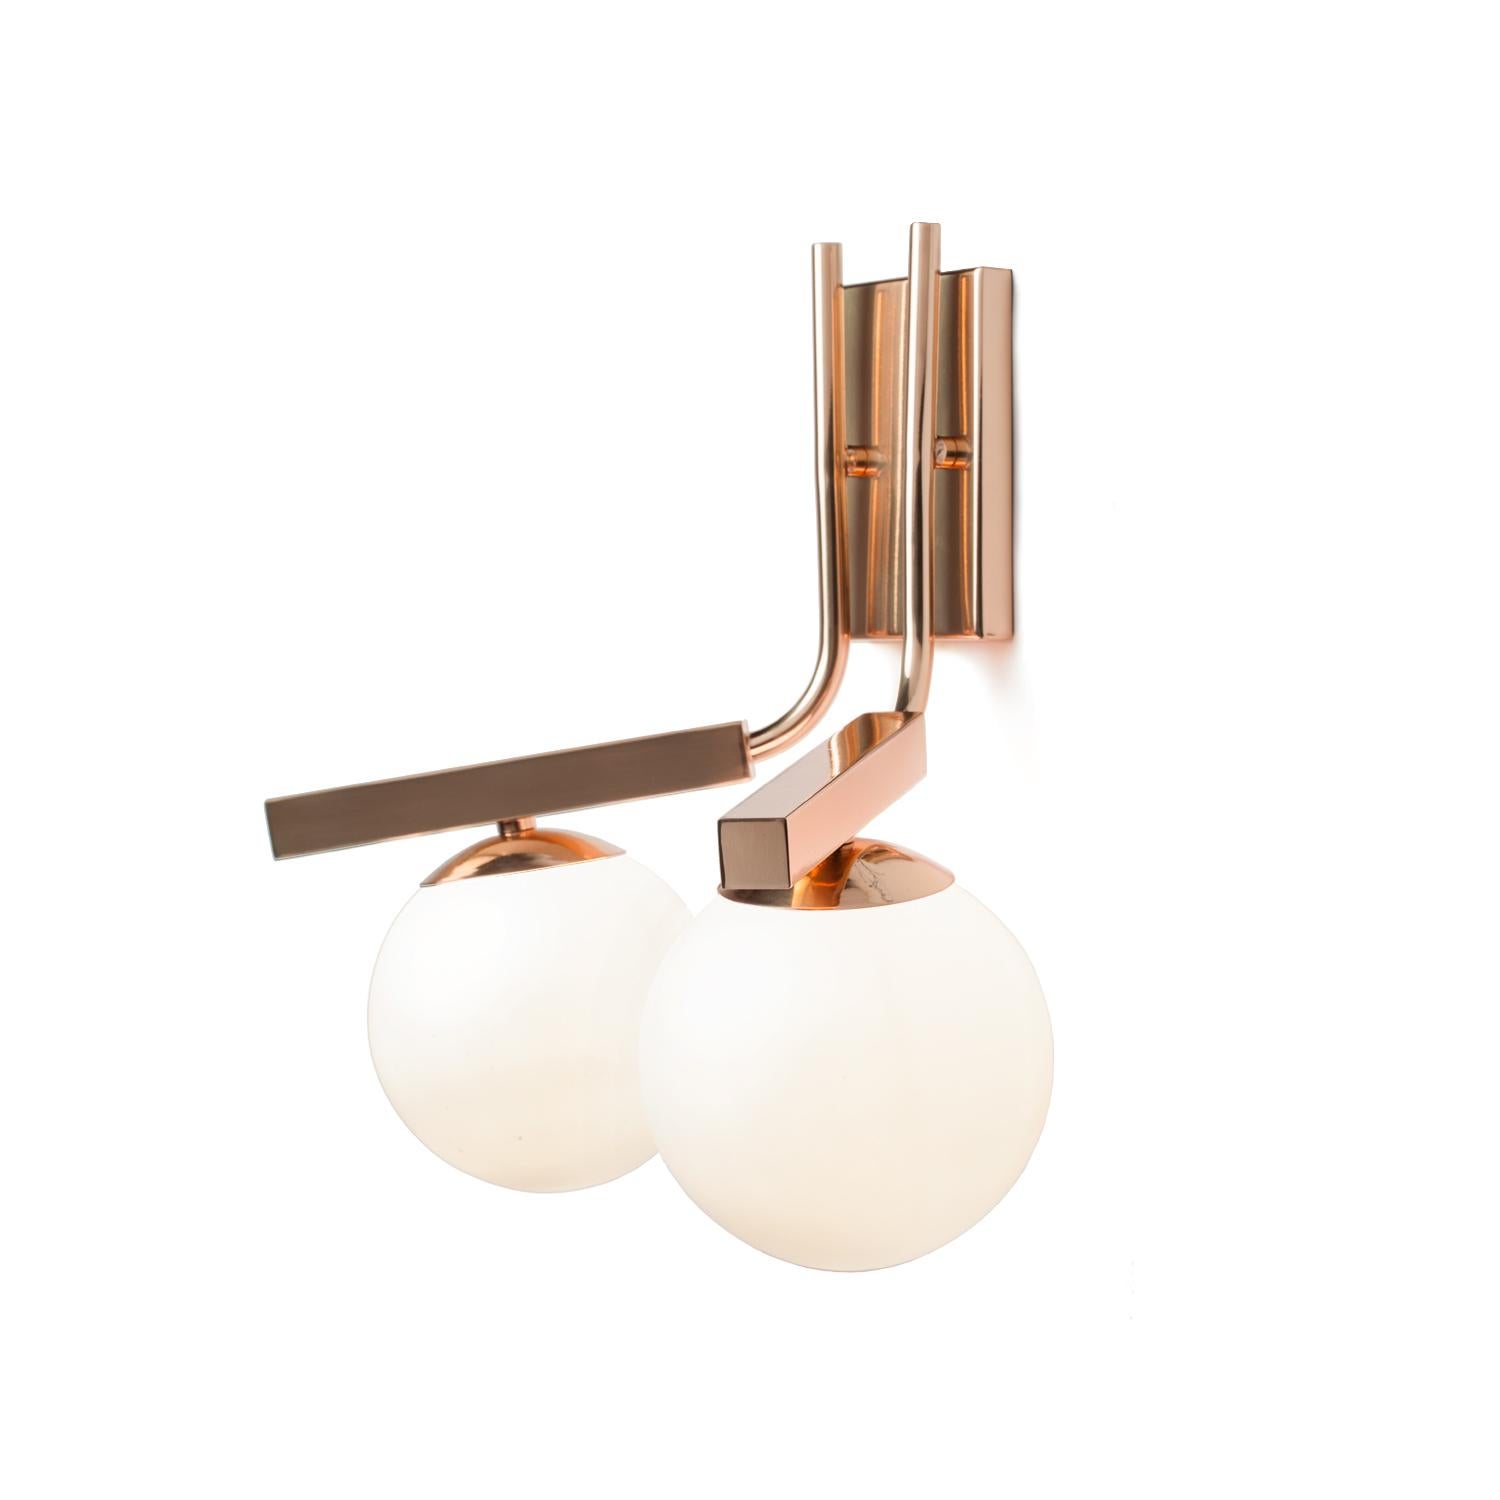 Globe Wall II Sconce is a stunning, timeless lamp with a delicate brass metal structure and soft opal glass globes. Other finishes available.
Made to Order. 

Part of the Mambo Unlimited Ideas design group, at Utu lamps the lighting field of design